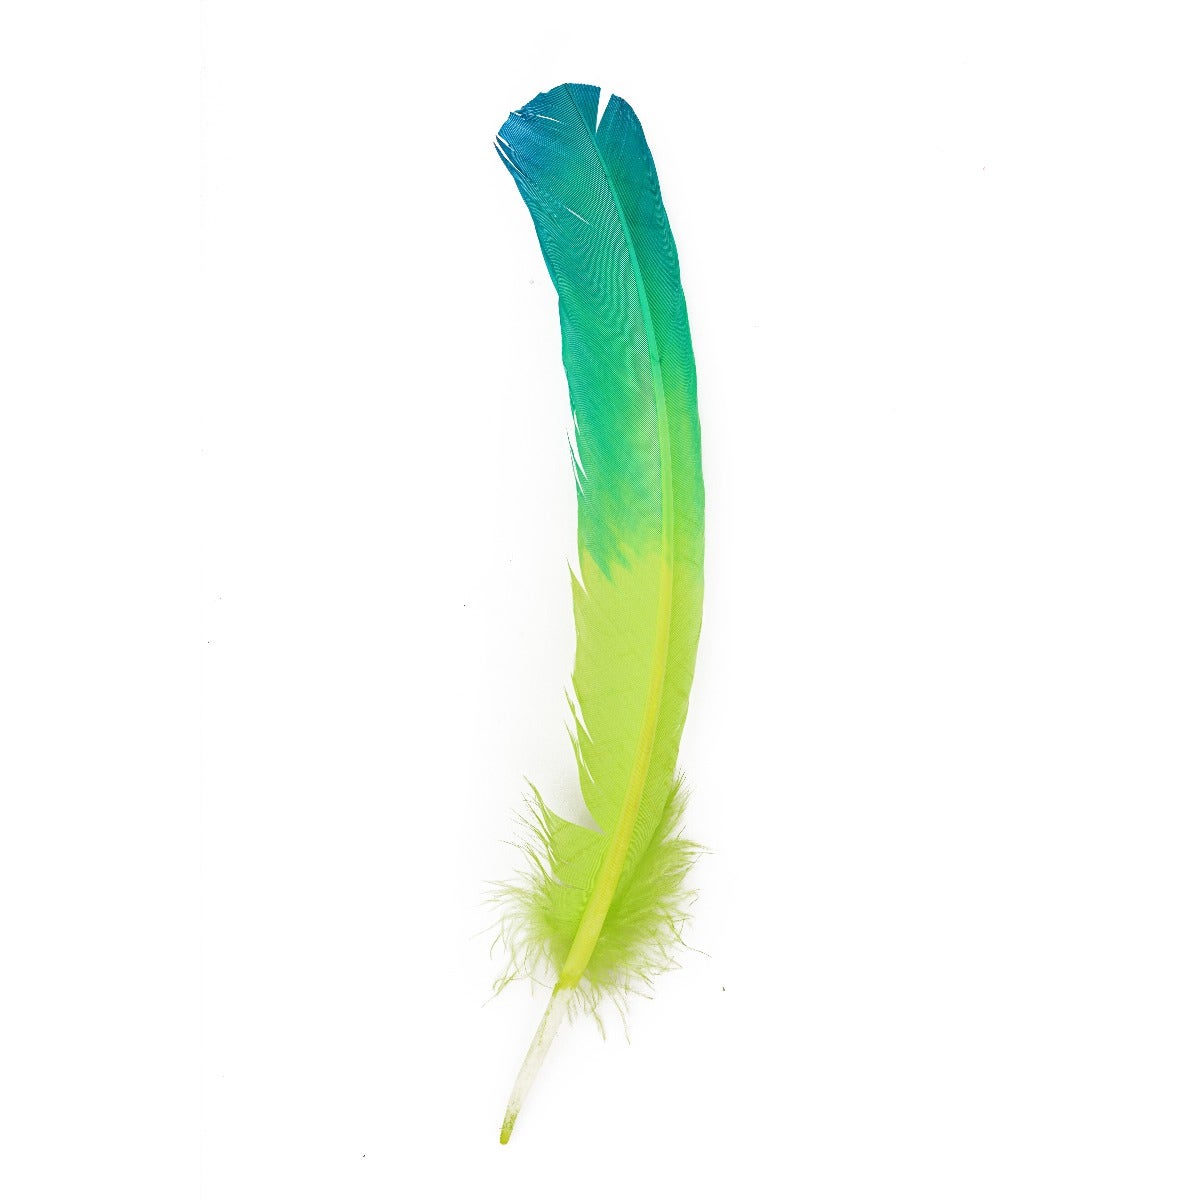 Bulk Two Tone Ombre Tipped Turkey Round Feathers Left Wing - 10-12” - 1/4 lb - Dark Turquoise - Lime